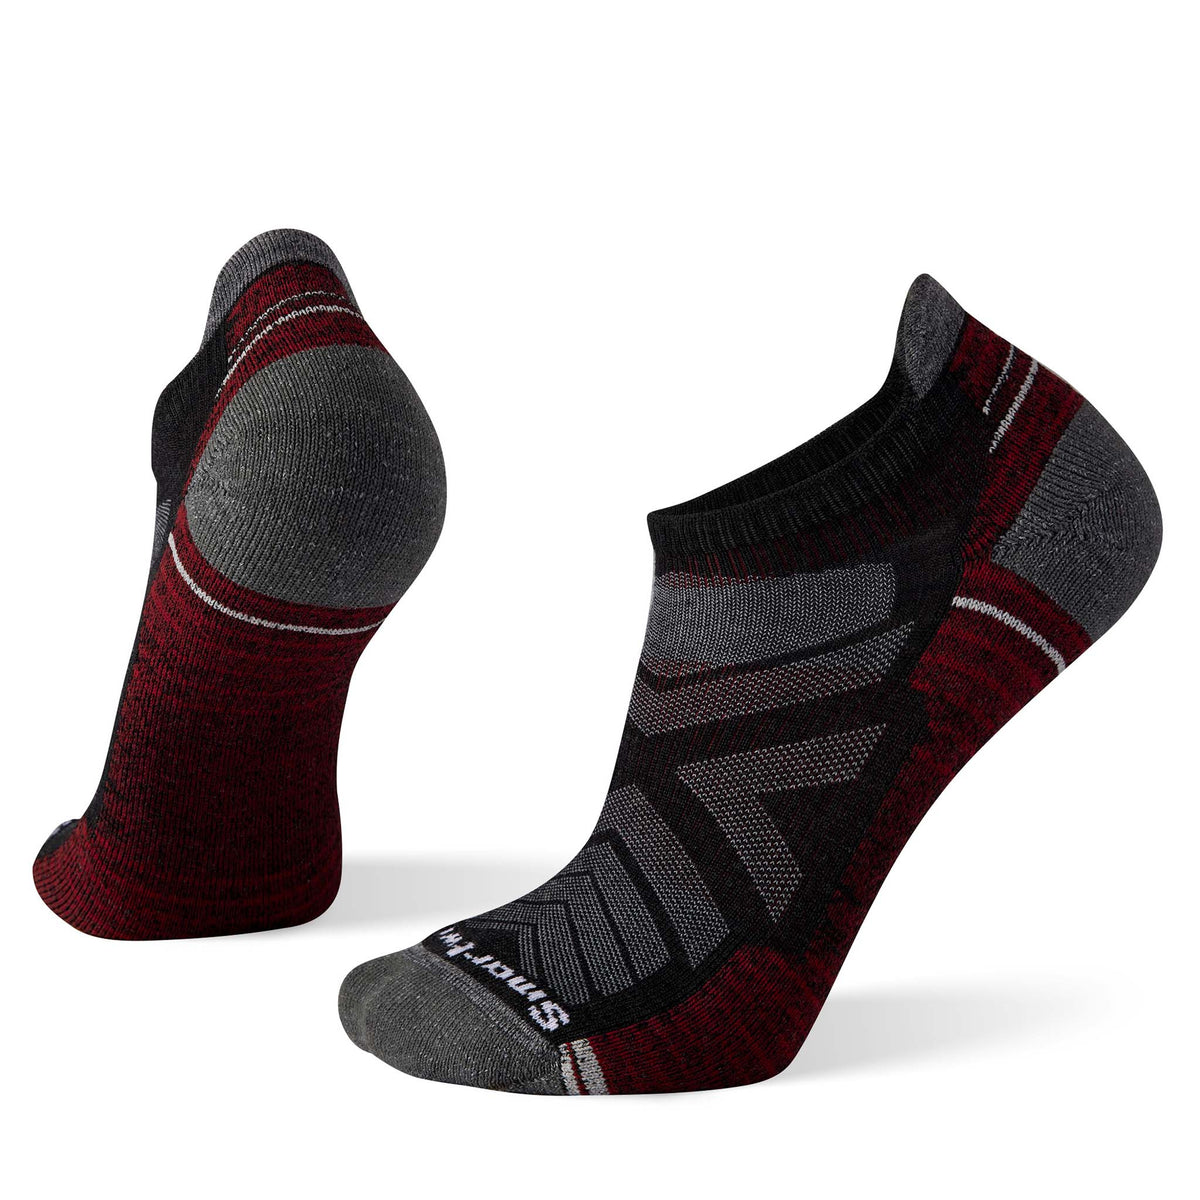 Smartwool Performance Hike Light Cushion chaussettes basses charcoal homme